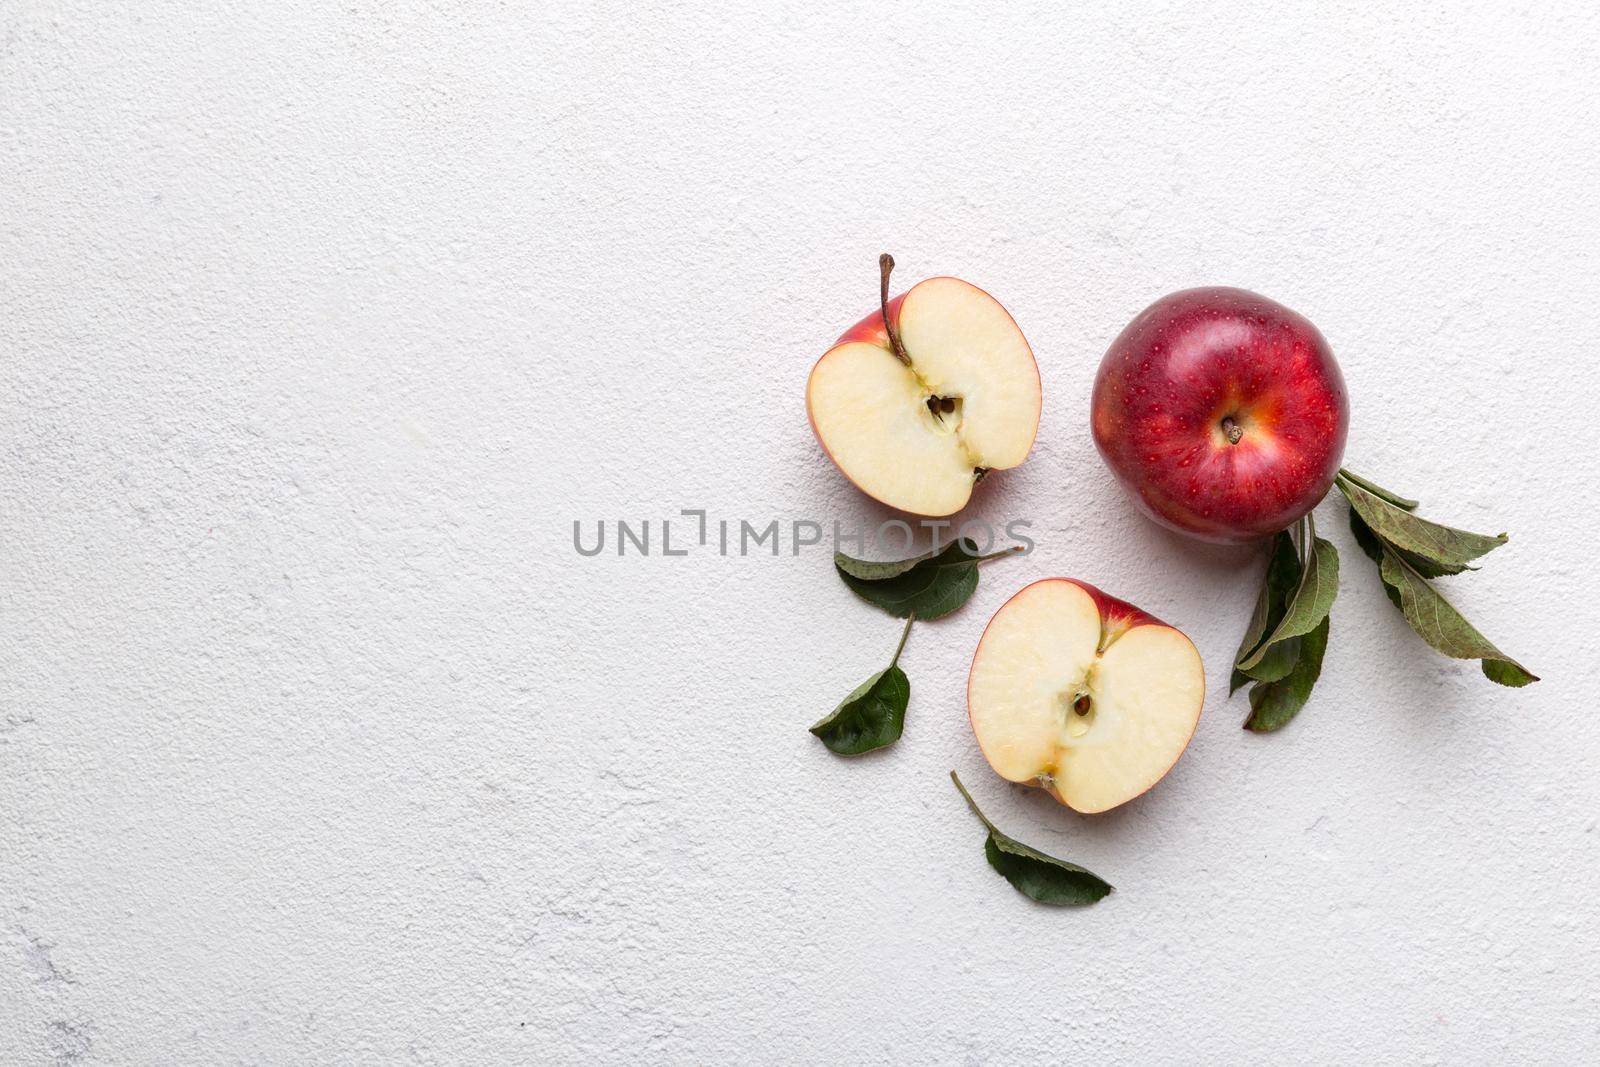 Fresh red apples with green leaves on wooden table. On wooden background. Top view free space for text.